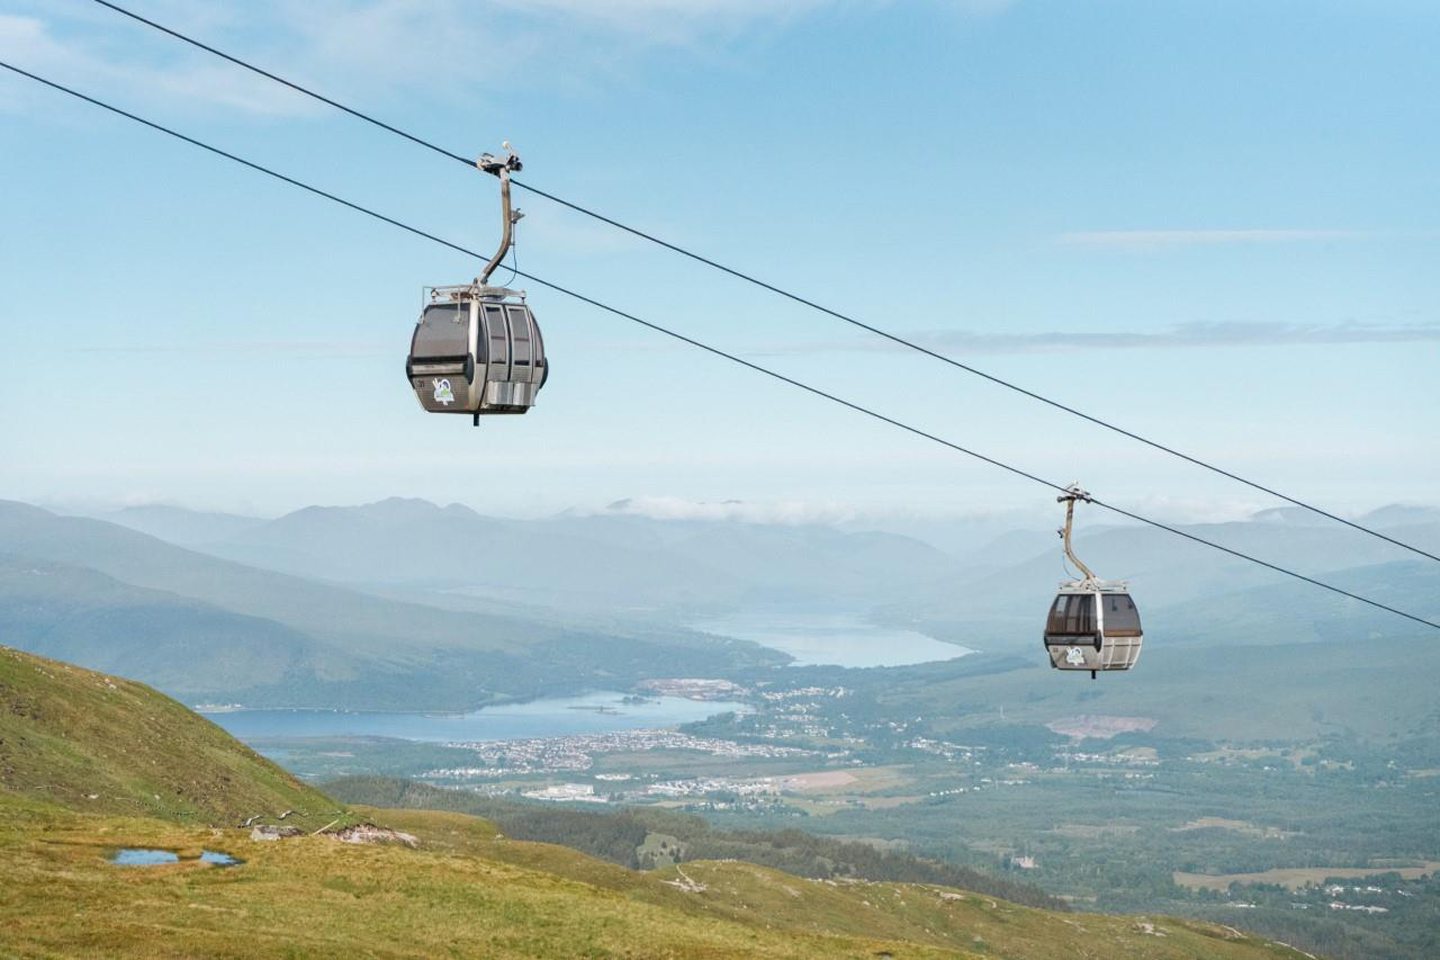 mountain gondola at Nevis Range, the only one in the UK